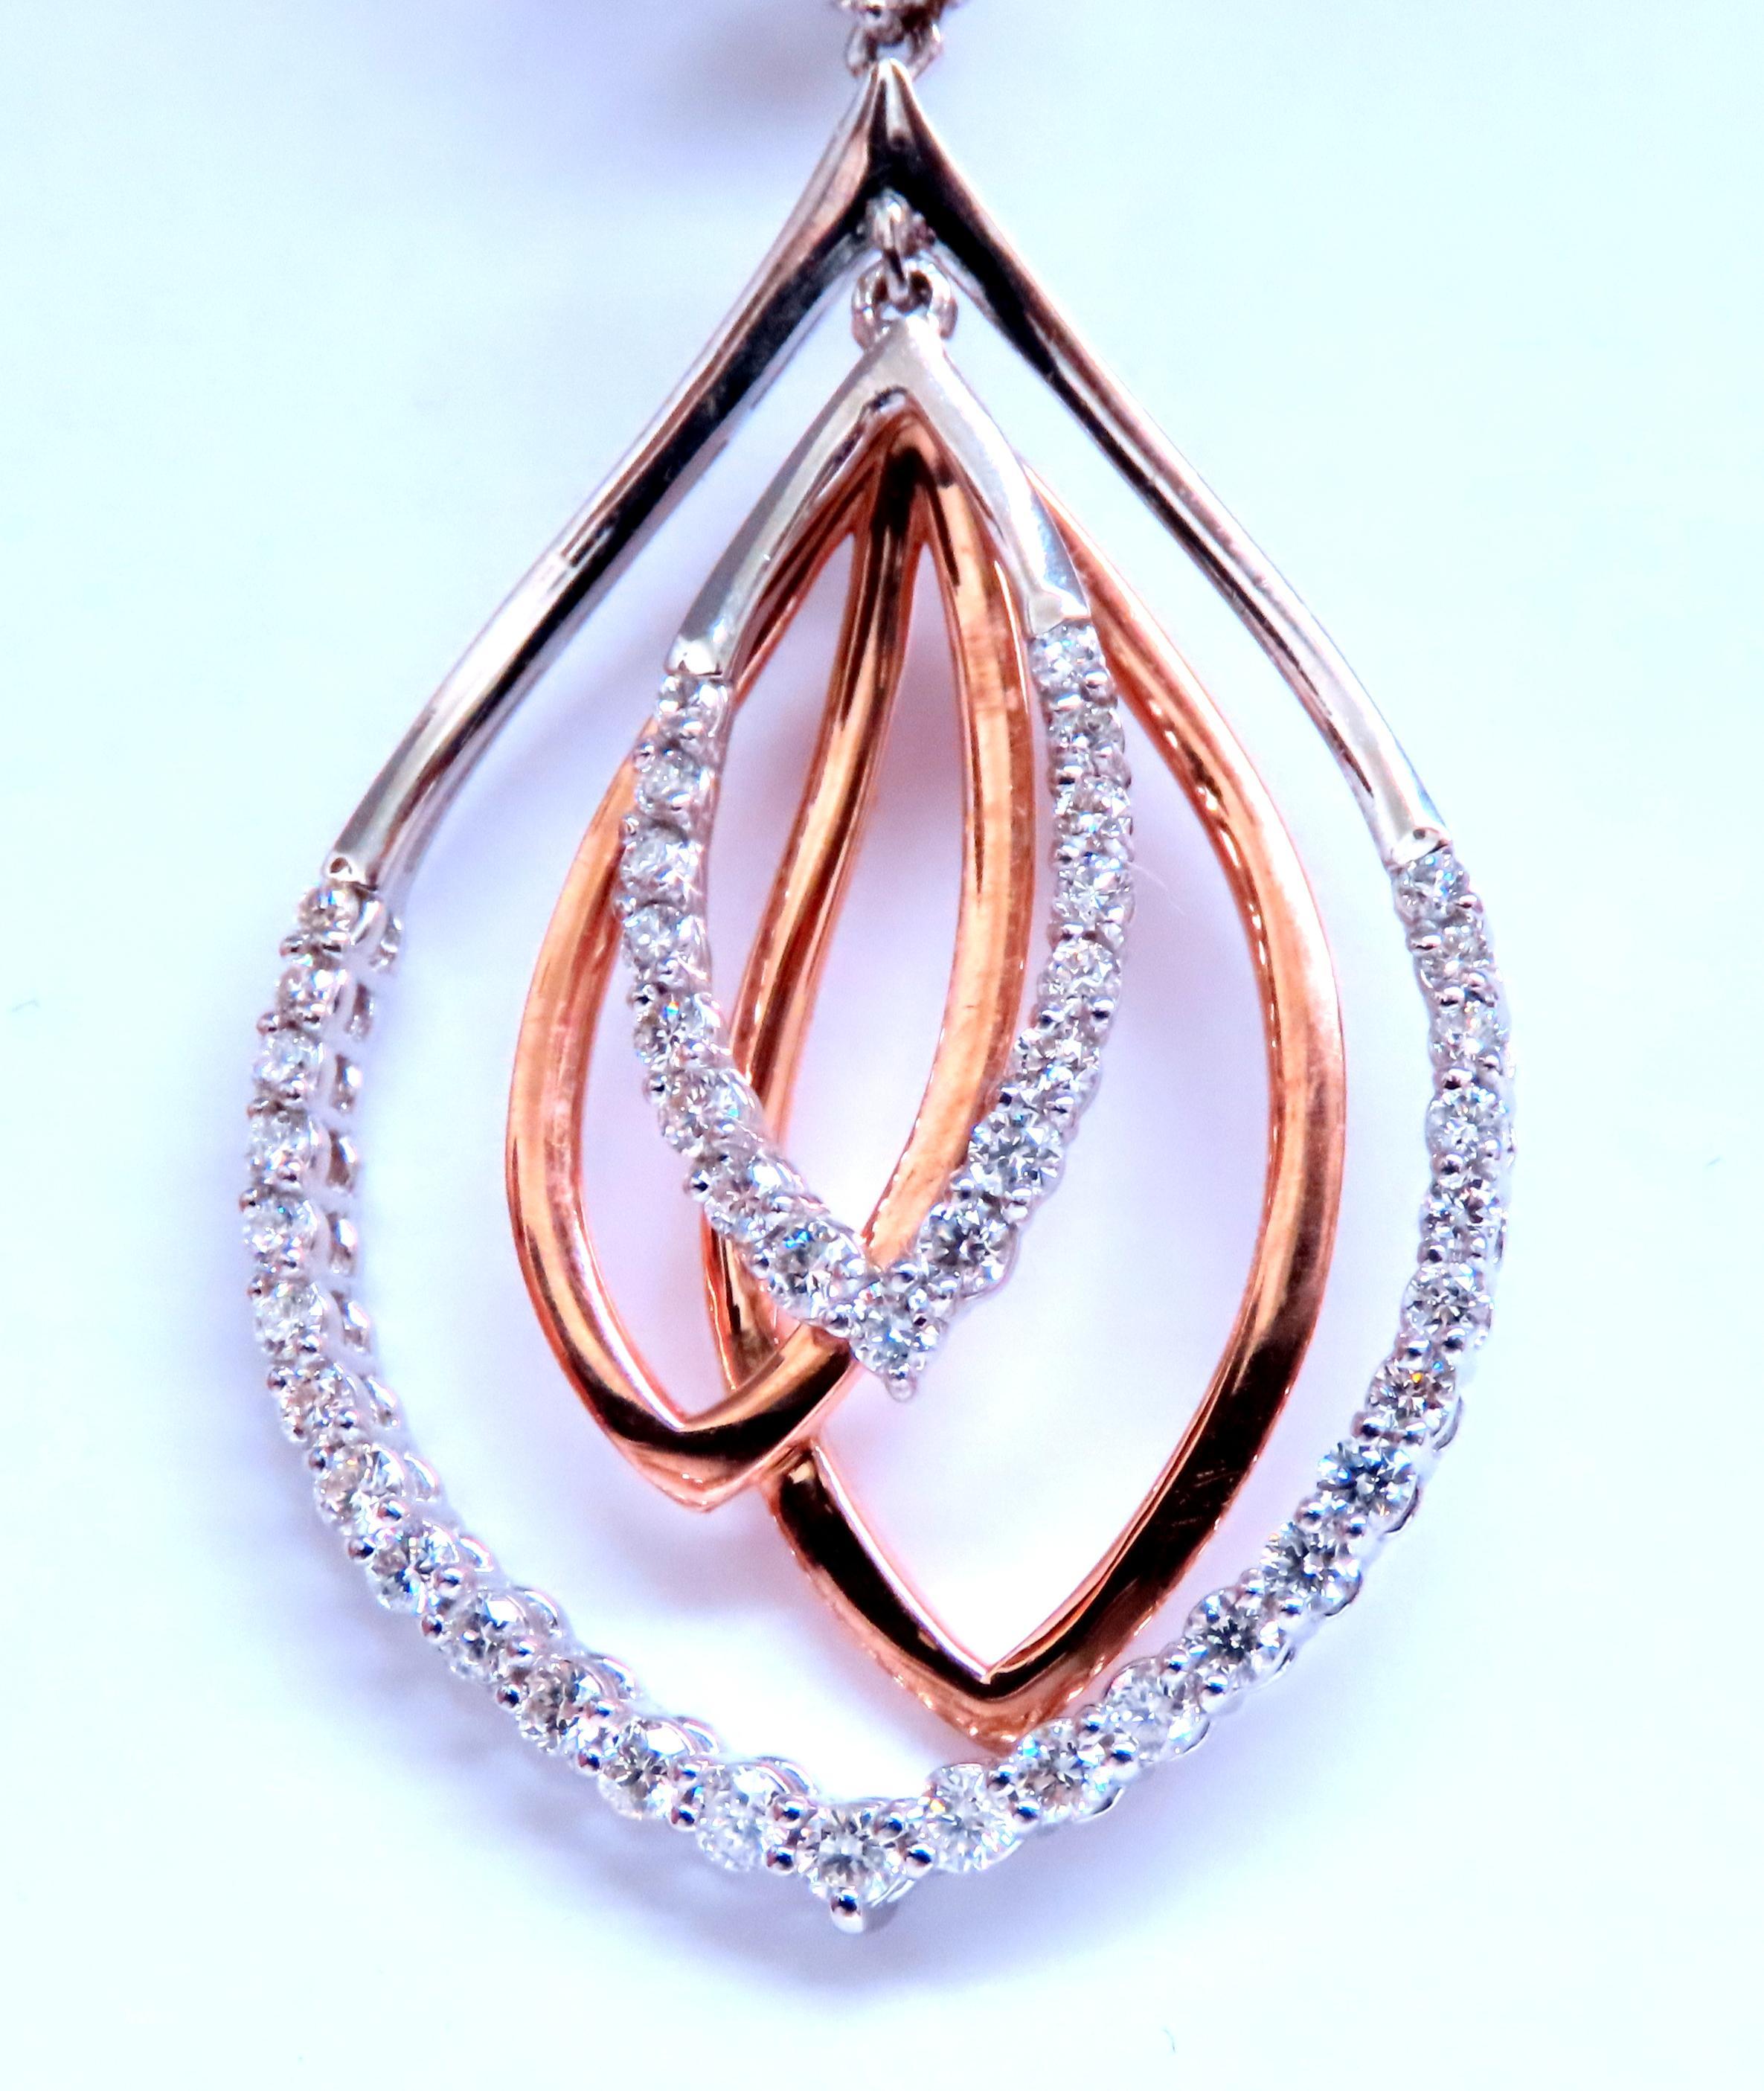 Three Tier Dangling Loops Diamond Earrings.
2.10ct Round Natural Diamonds.
G-color
Vs-2 clarity
14kt rose & white gold.
15.8 grams
55mm long
25mm wide
Lever Closure 

$9000 appraisal to accompany